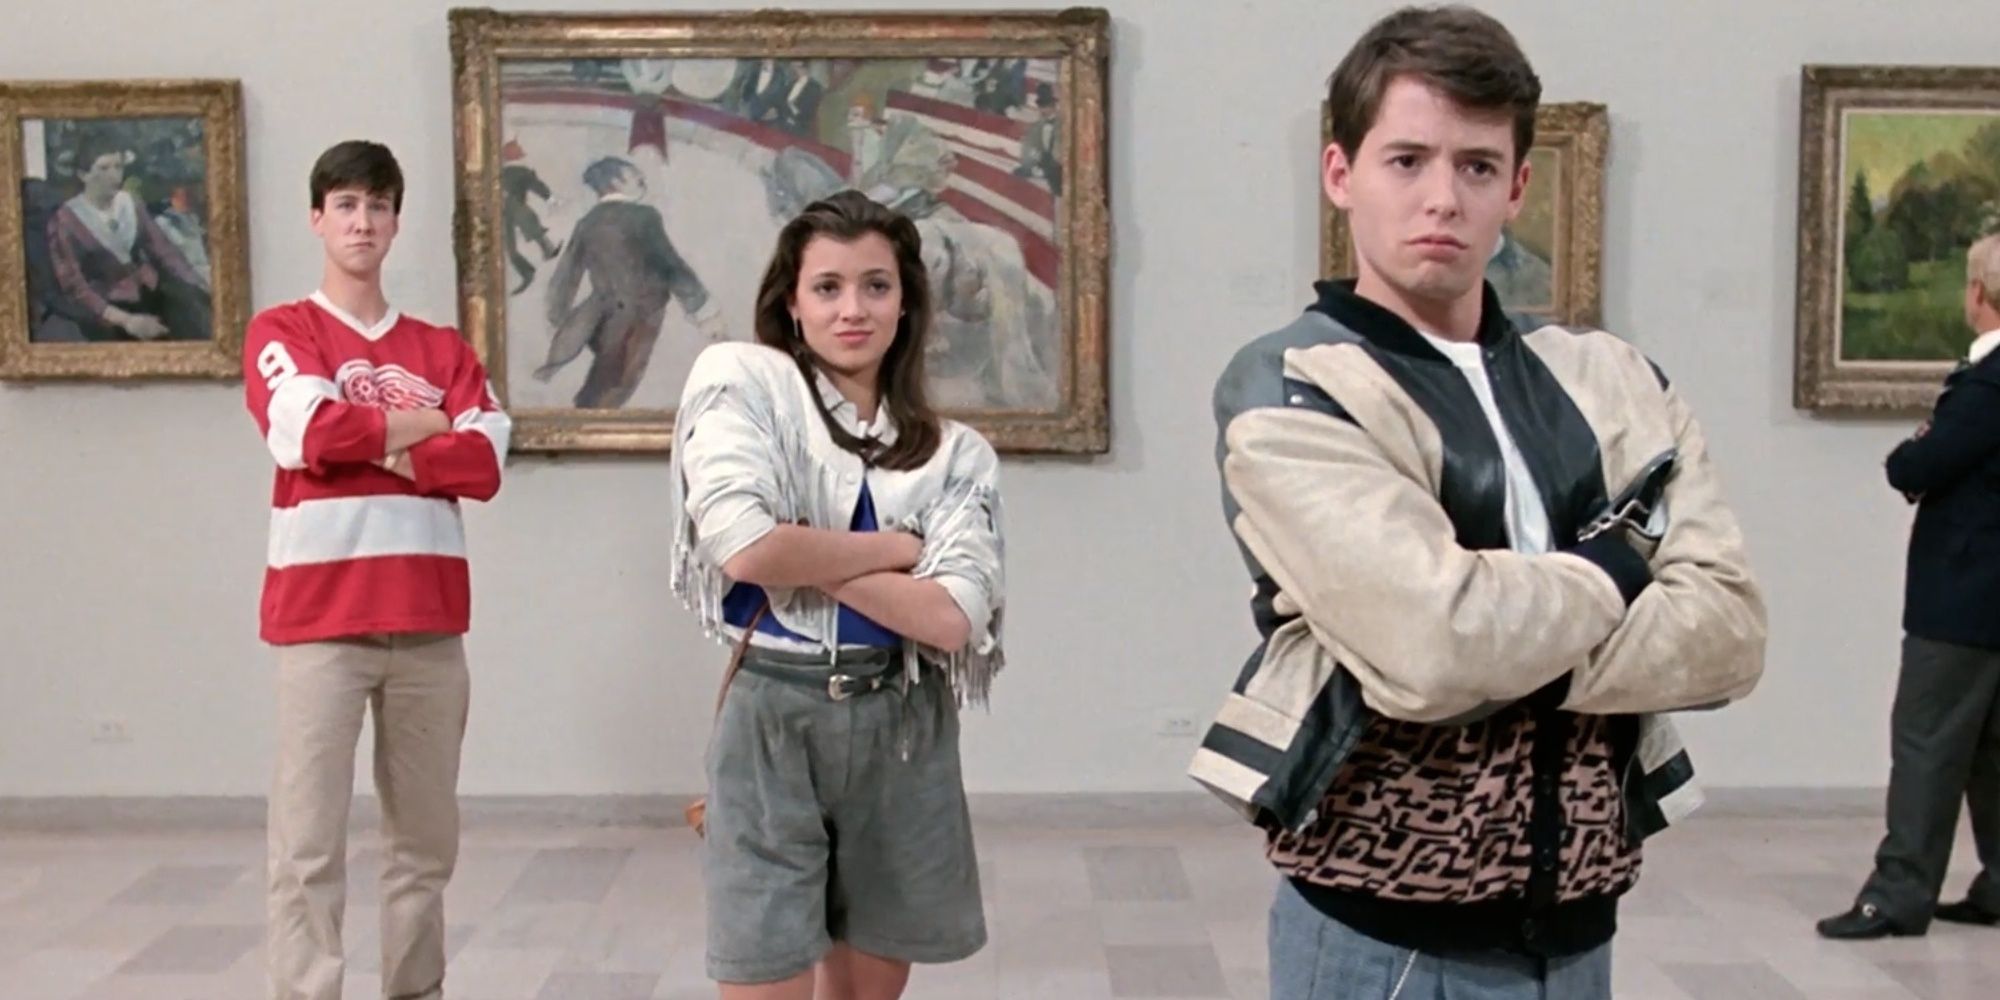 Alan Ruck, Mia Sara, and Matthew Broderick as Cameron Frye, Sloane Peterson, and Ferris Bueller in Ferris Bueller's Day Off